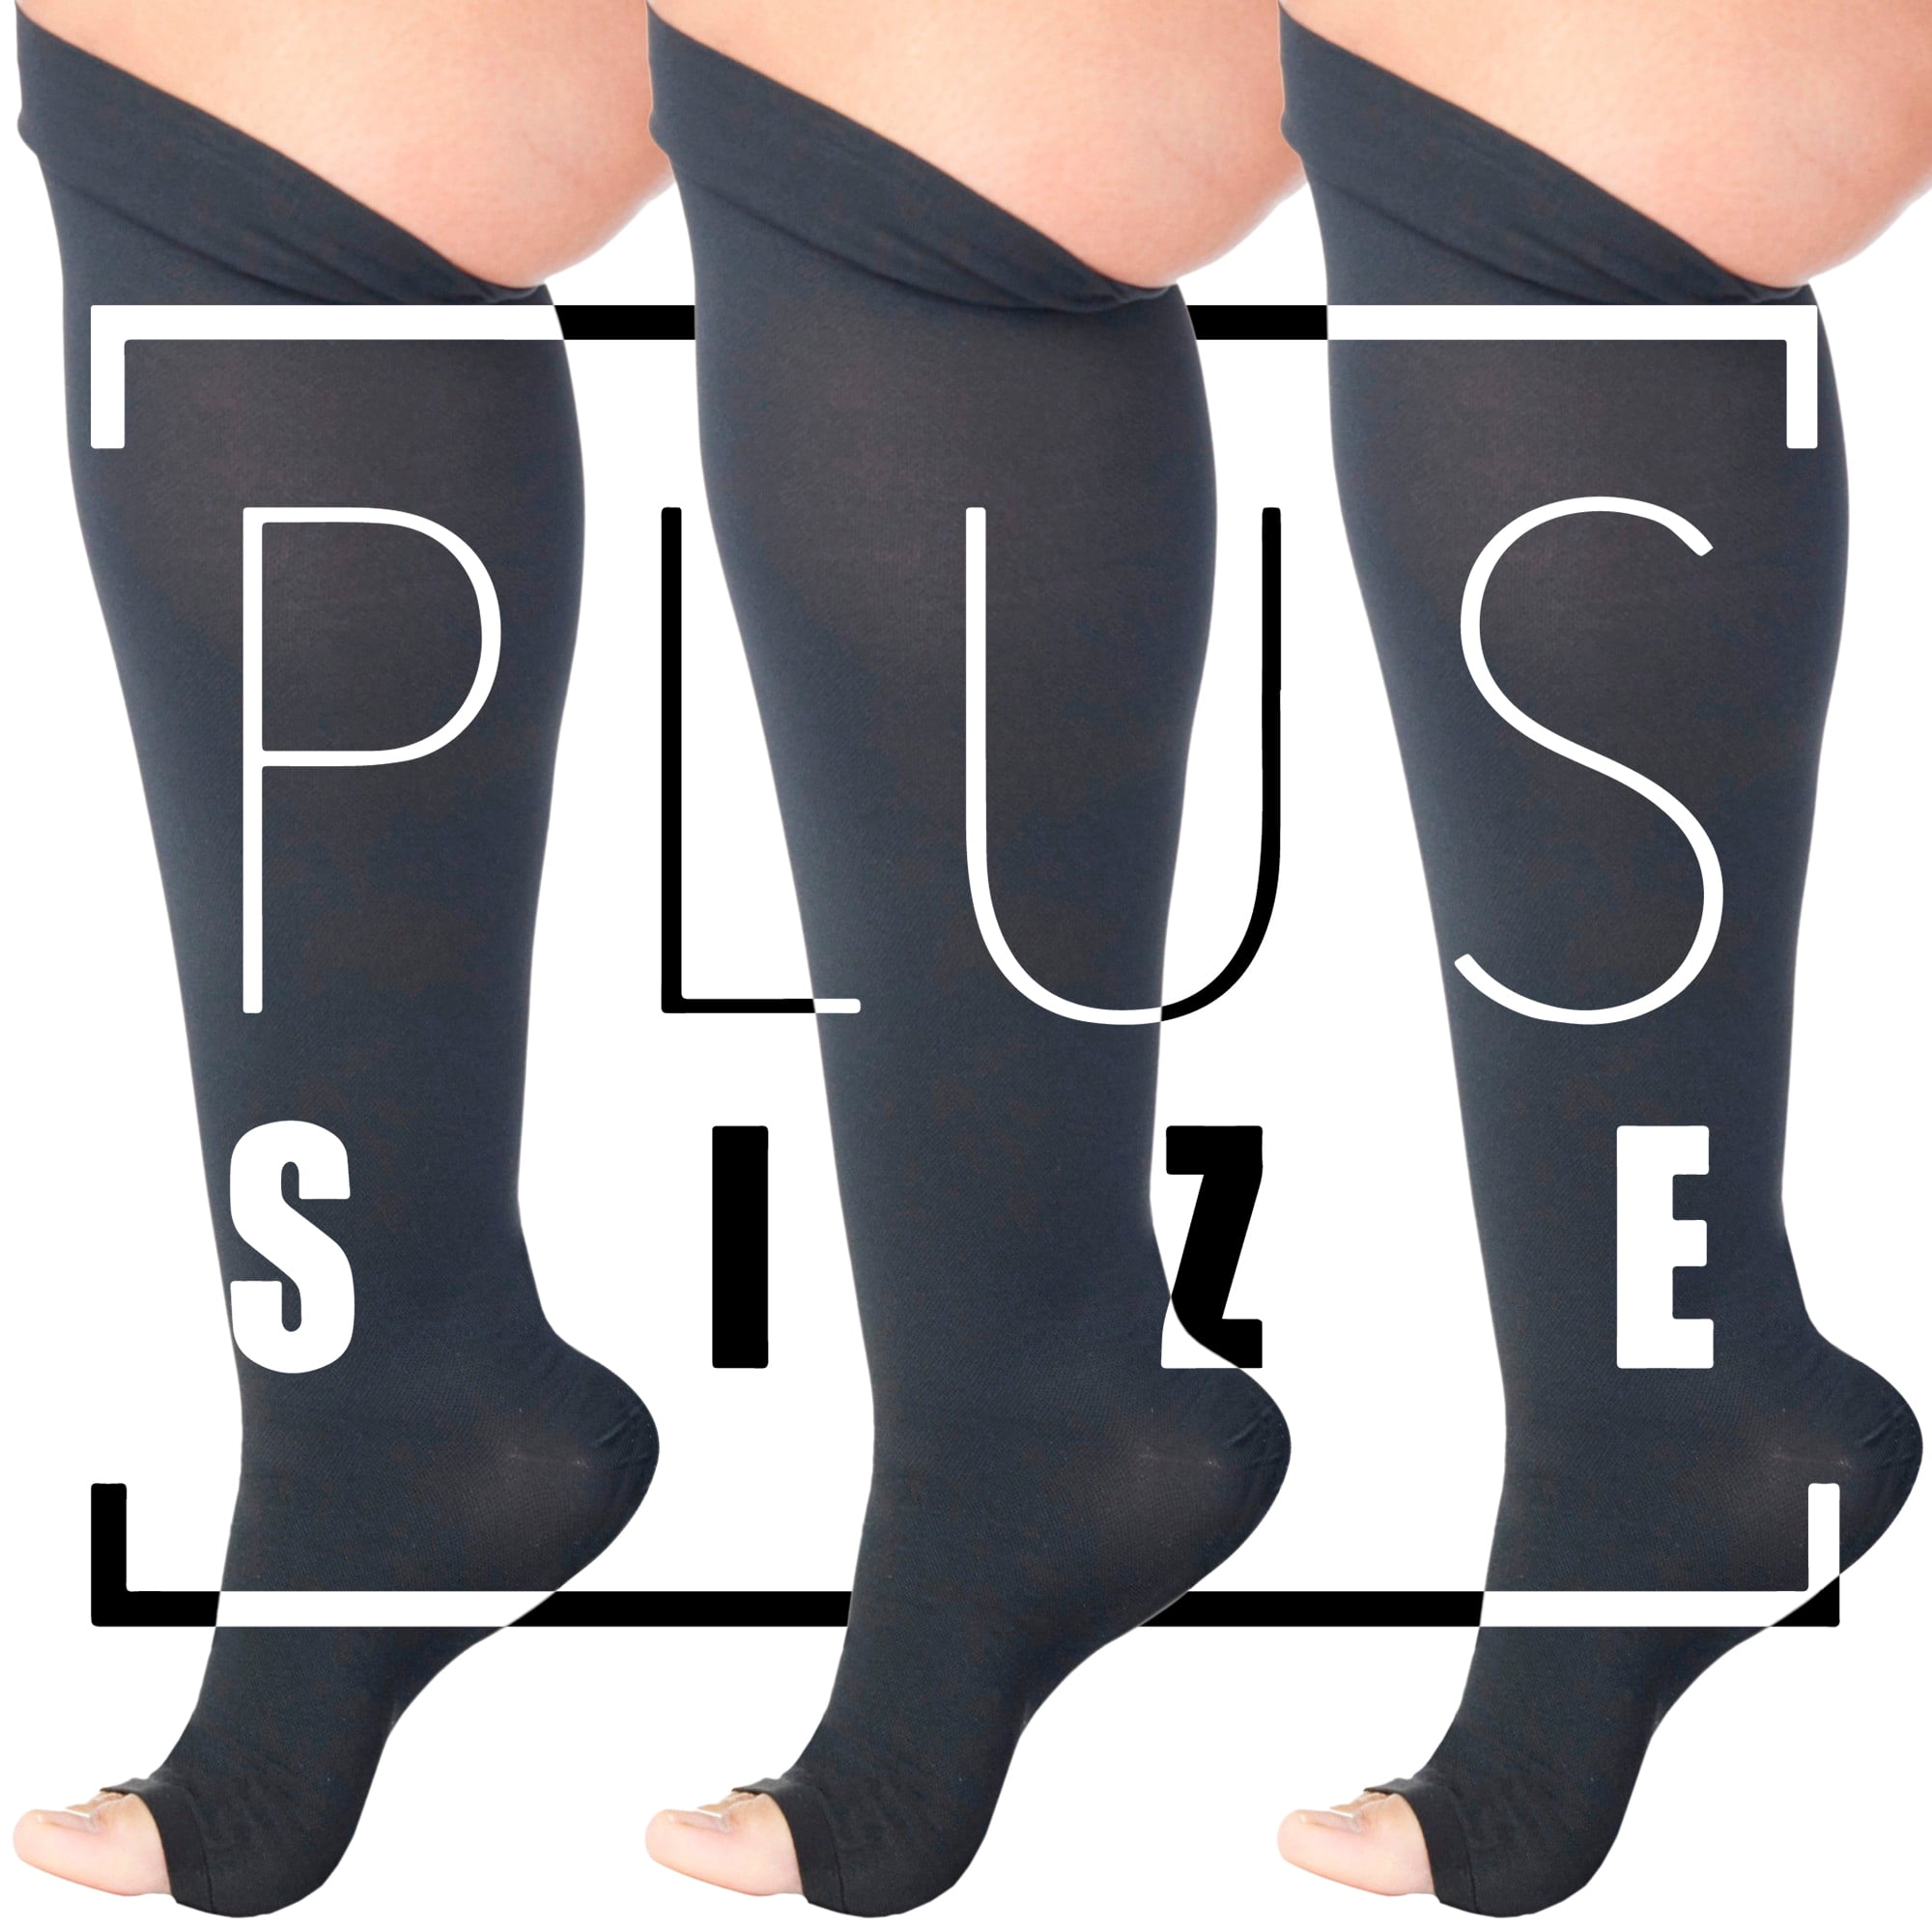 Mediven Plus Class 2 Below Knee Compression Stockings - Daylong